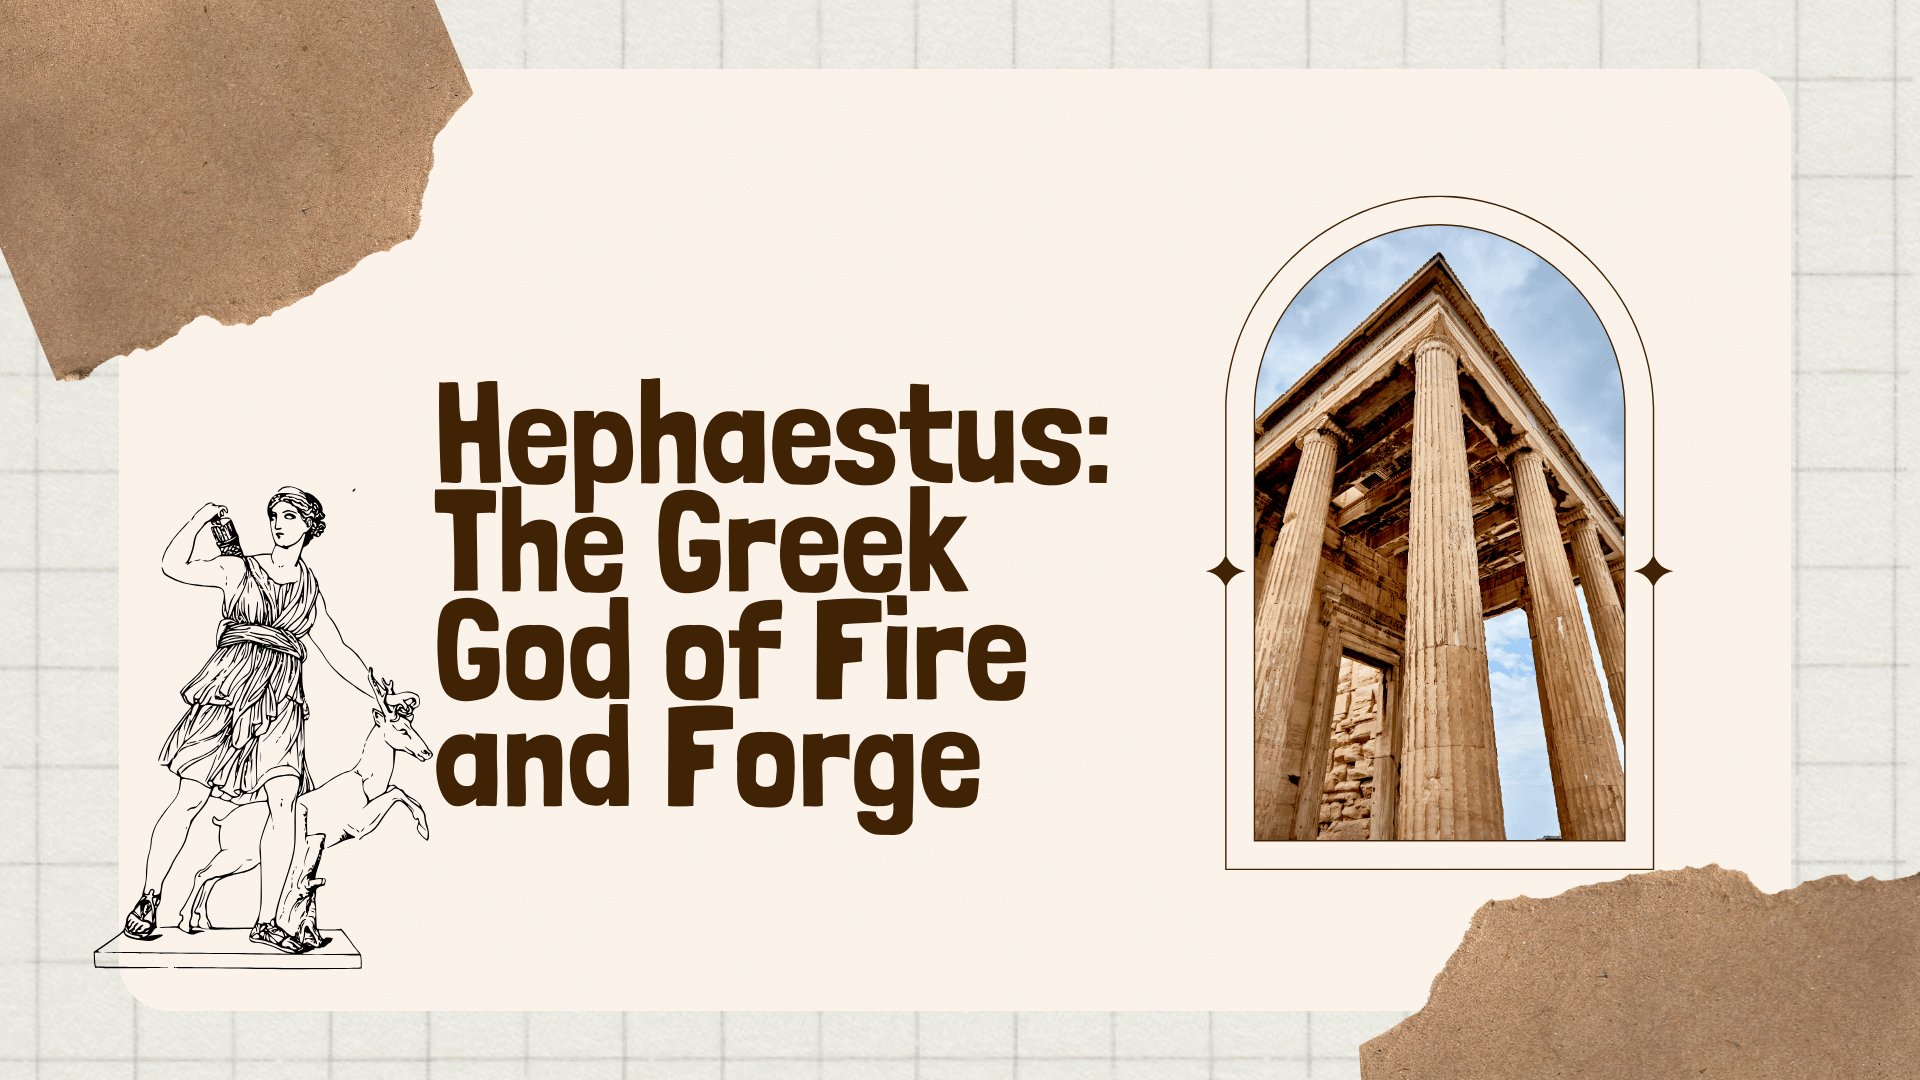 Hephaestus: The Greek God of Fire and Forge